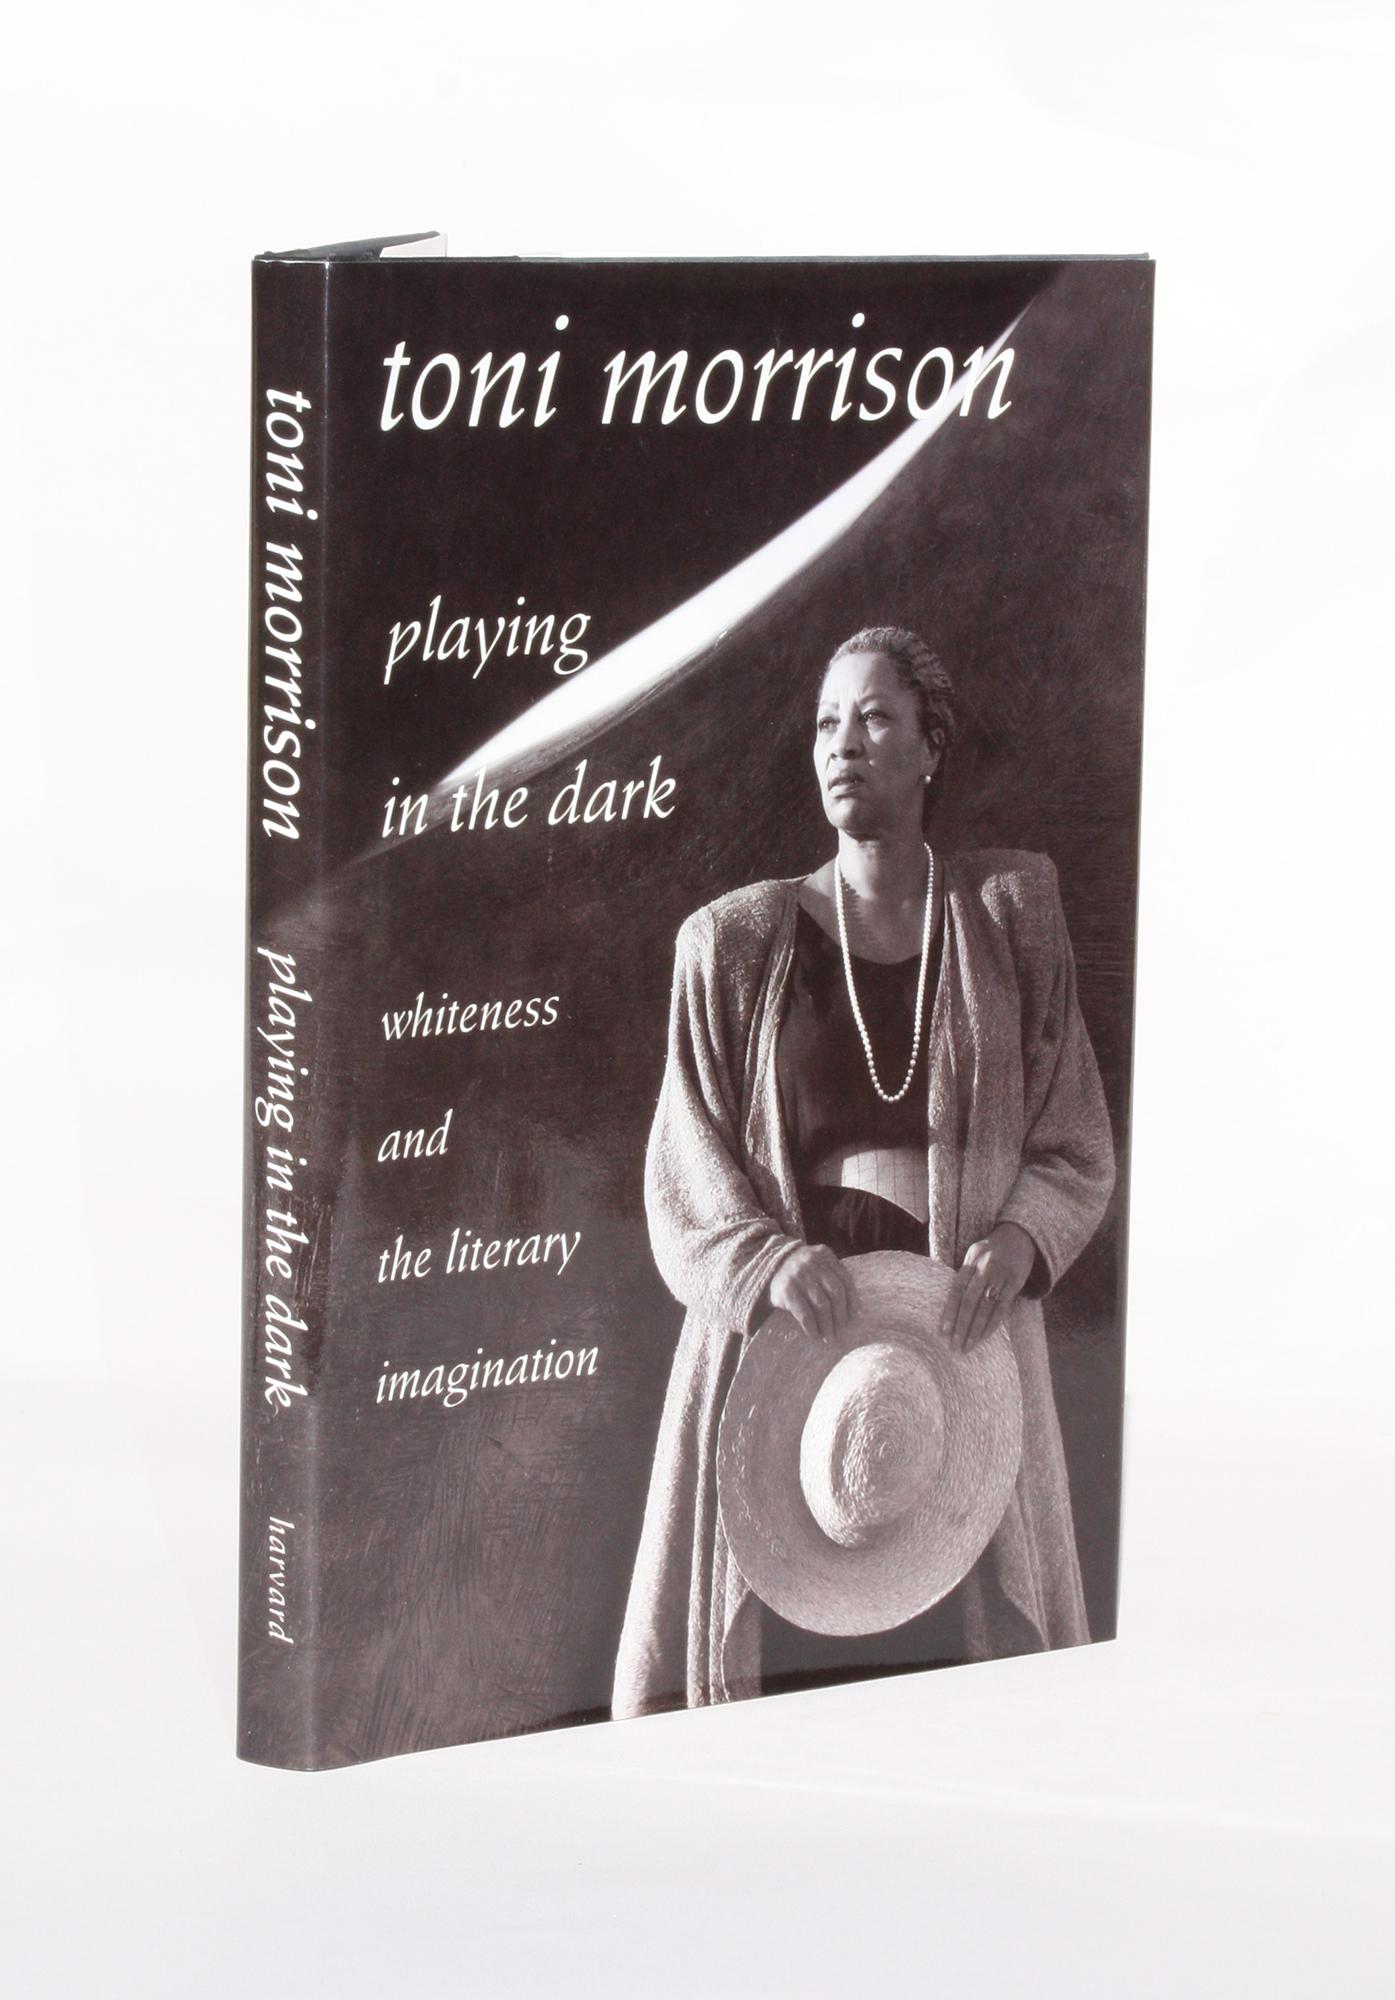 toni morrison playing in the dark essay